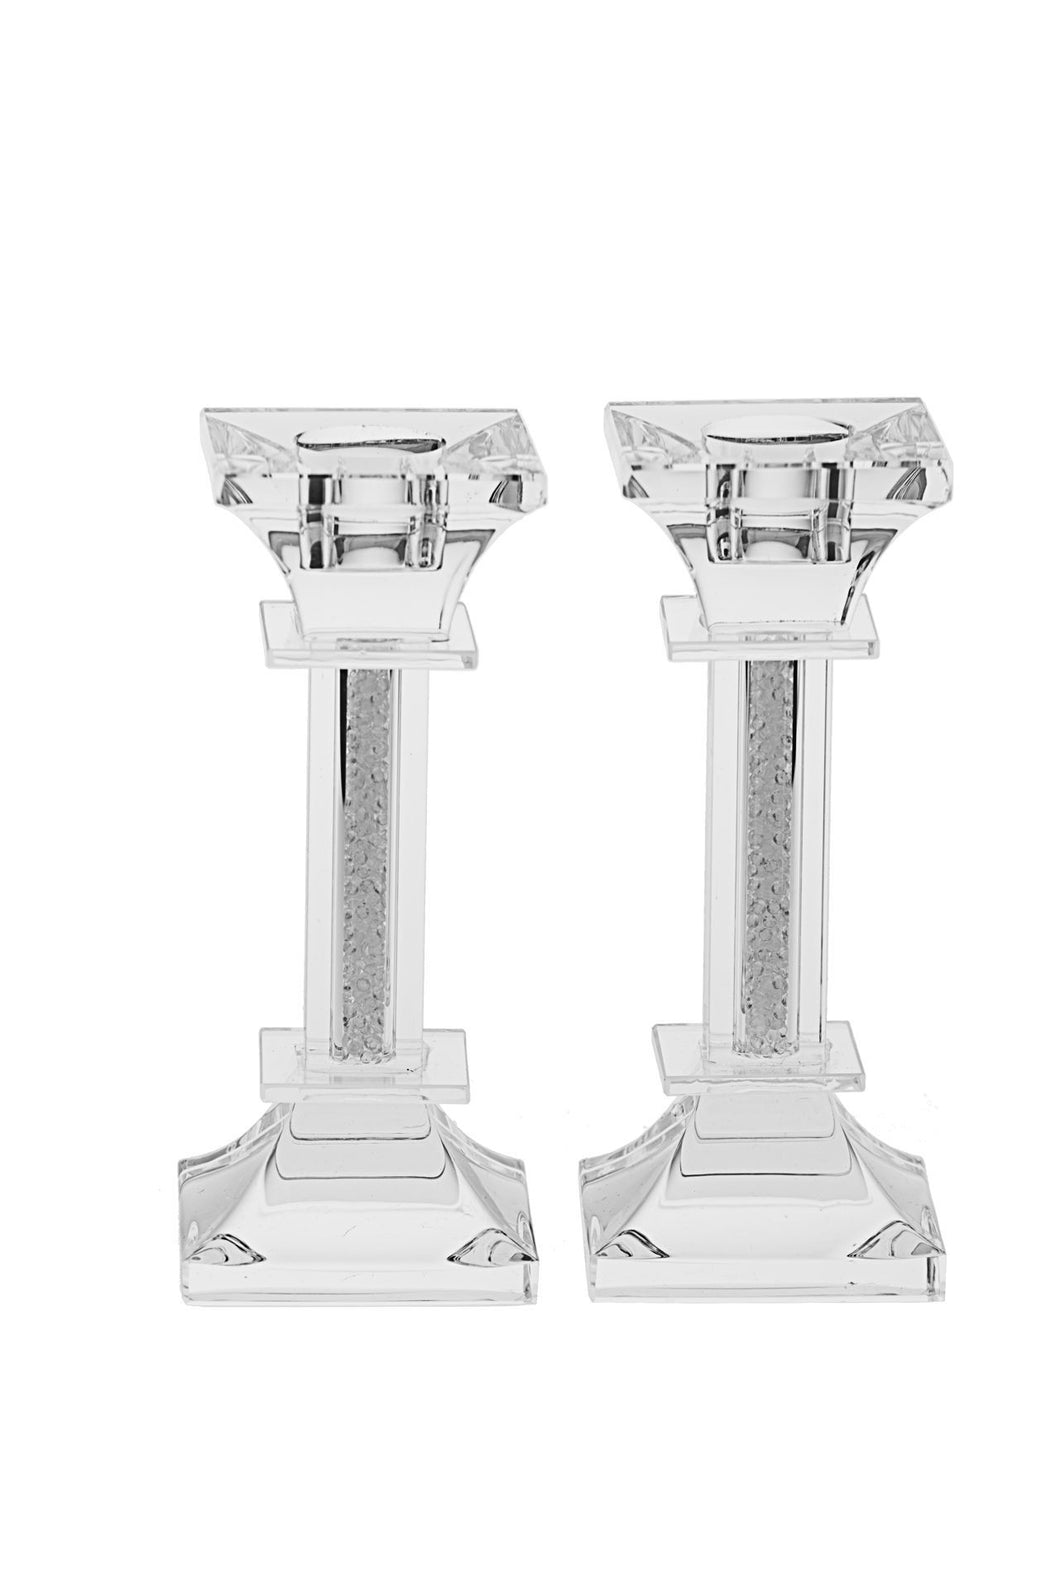 Crystal Candlesticks with Crushed Silver Stones